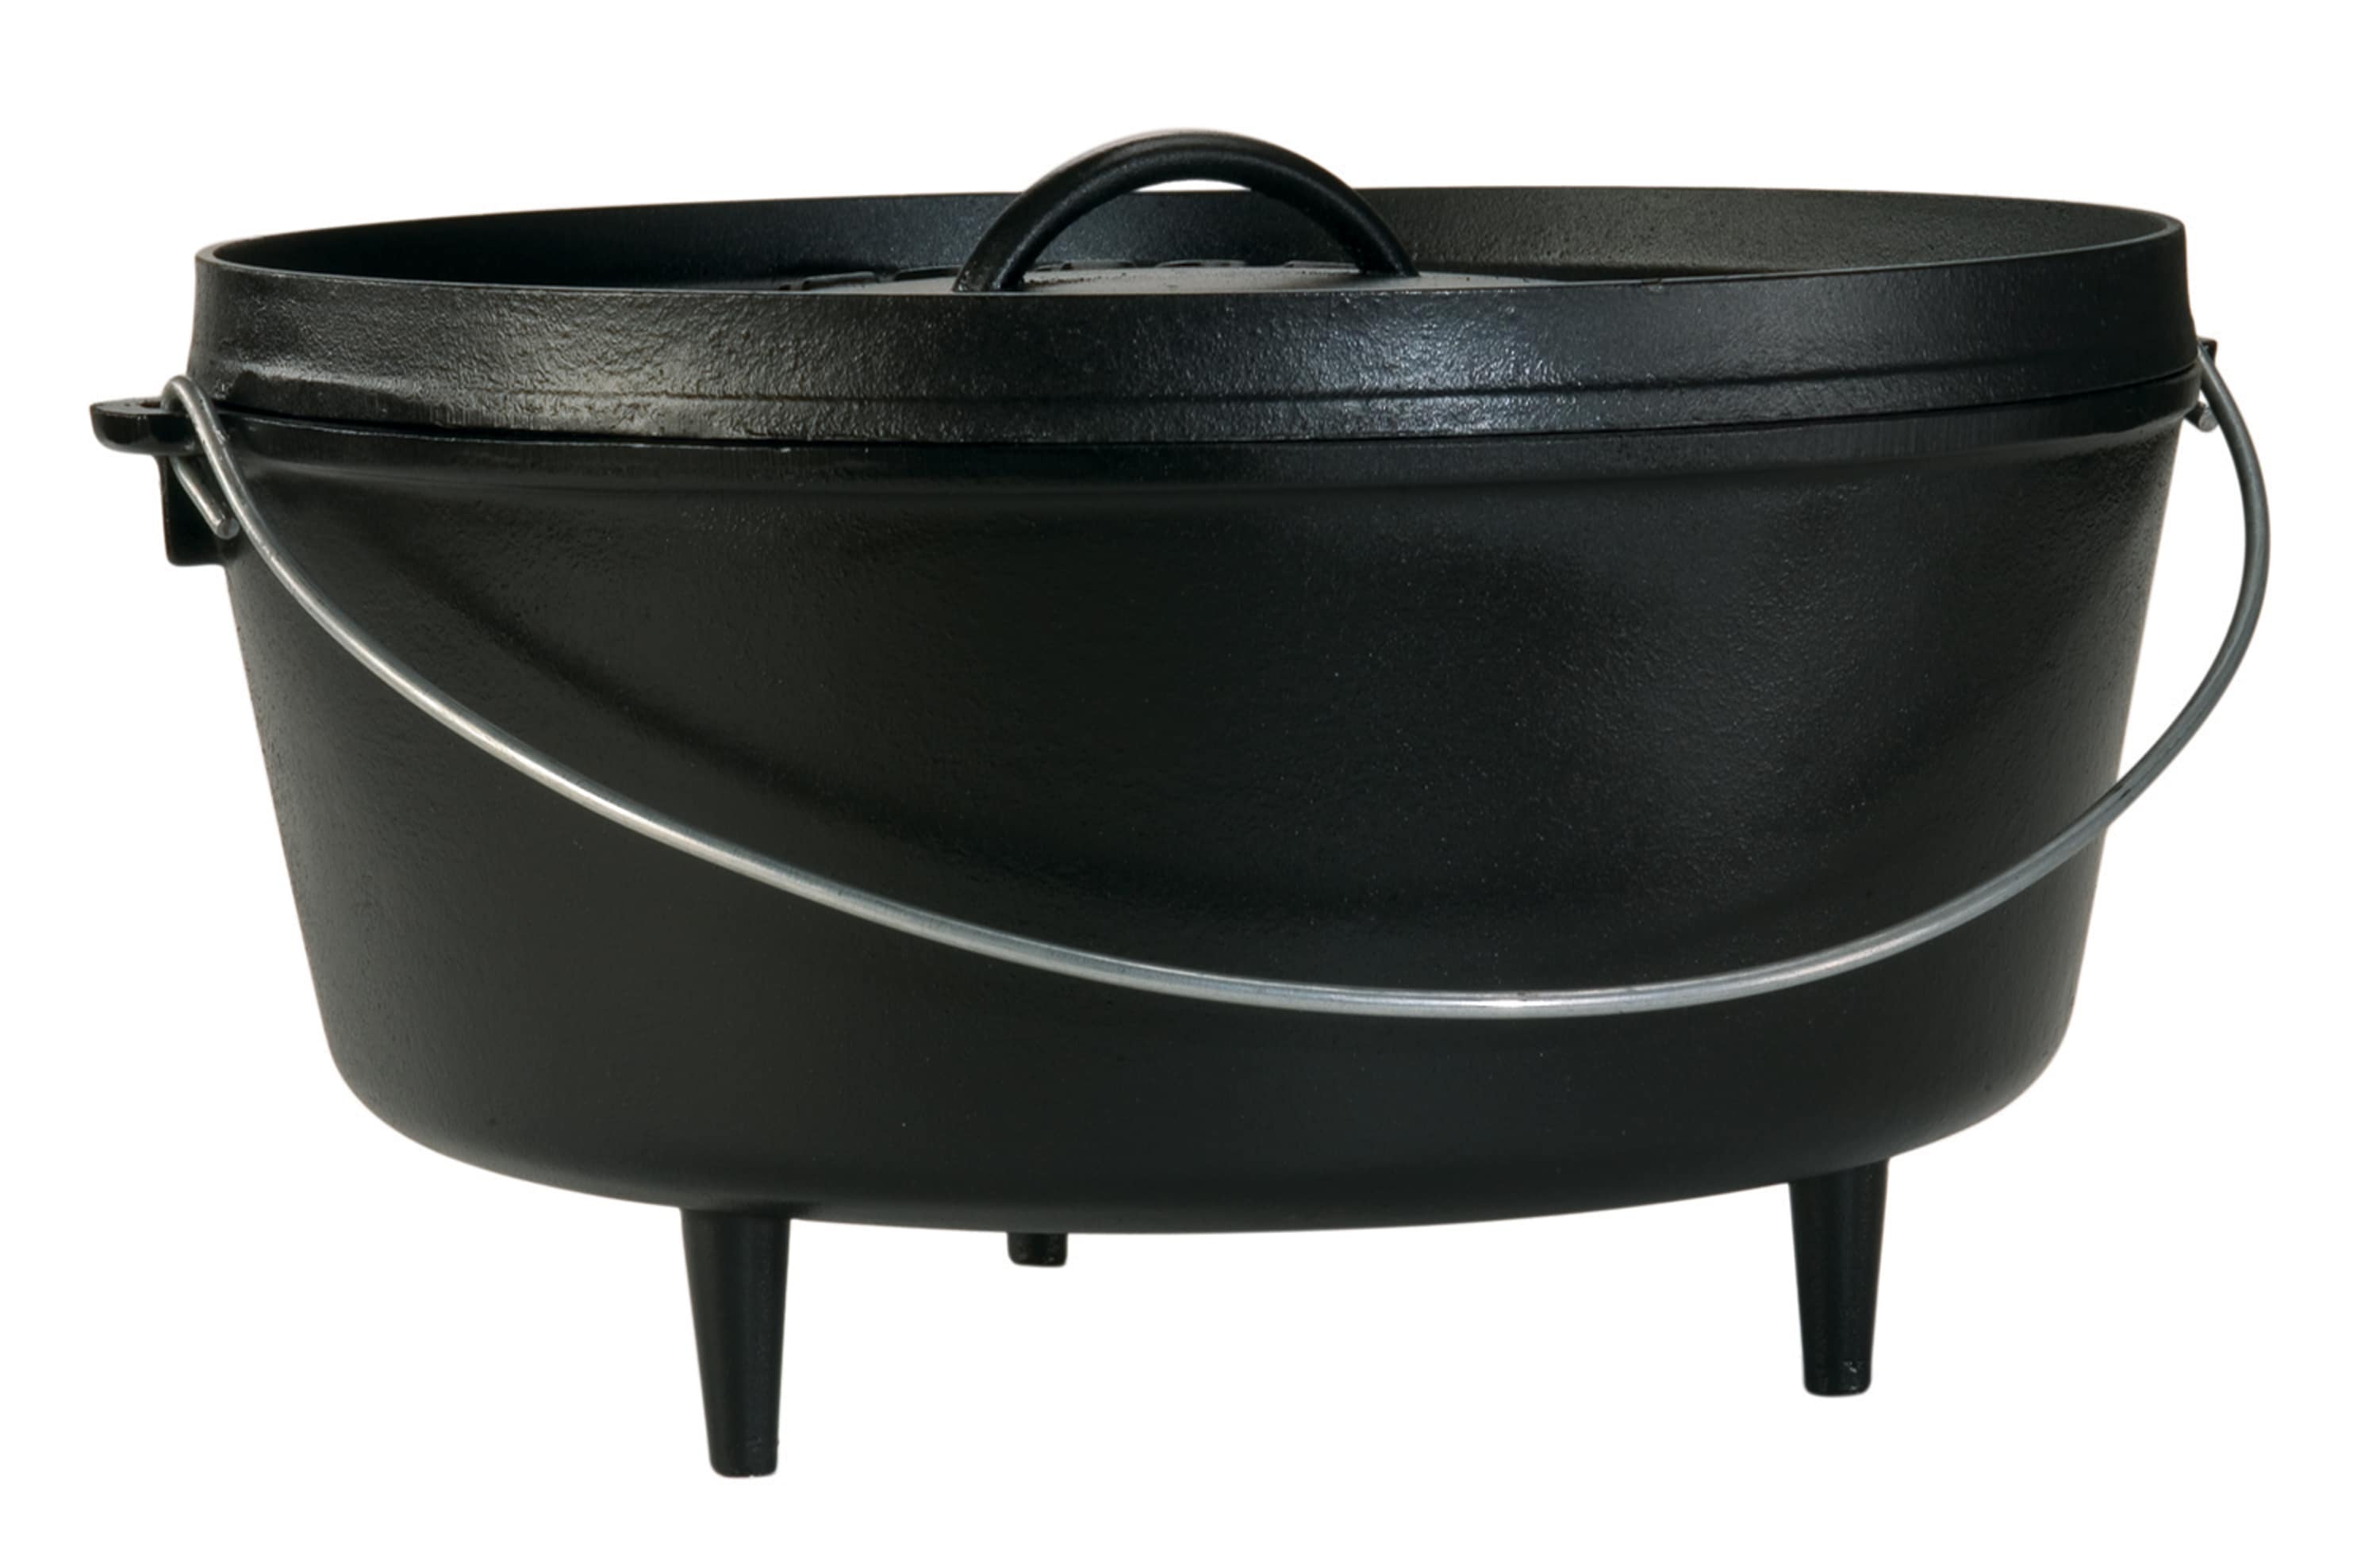 10-in and 14-in Cast Iron Skillet Set